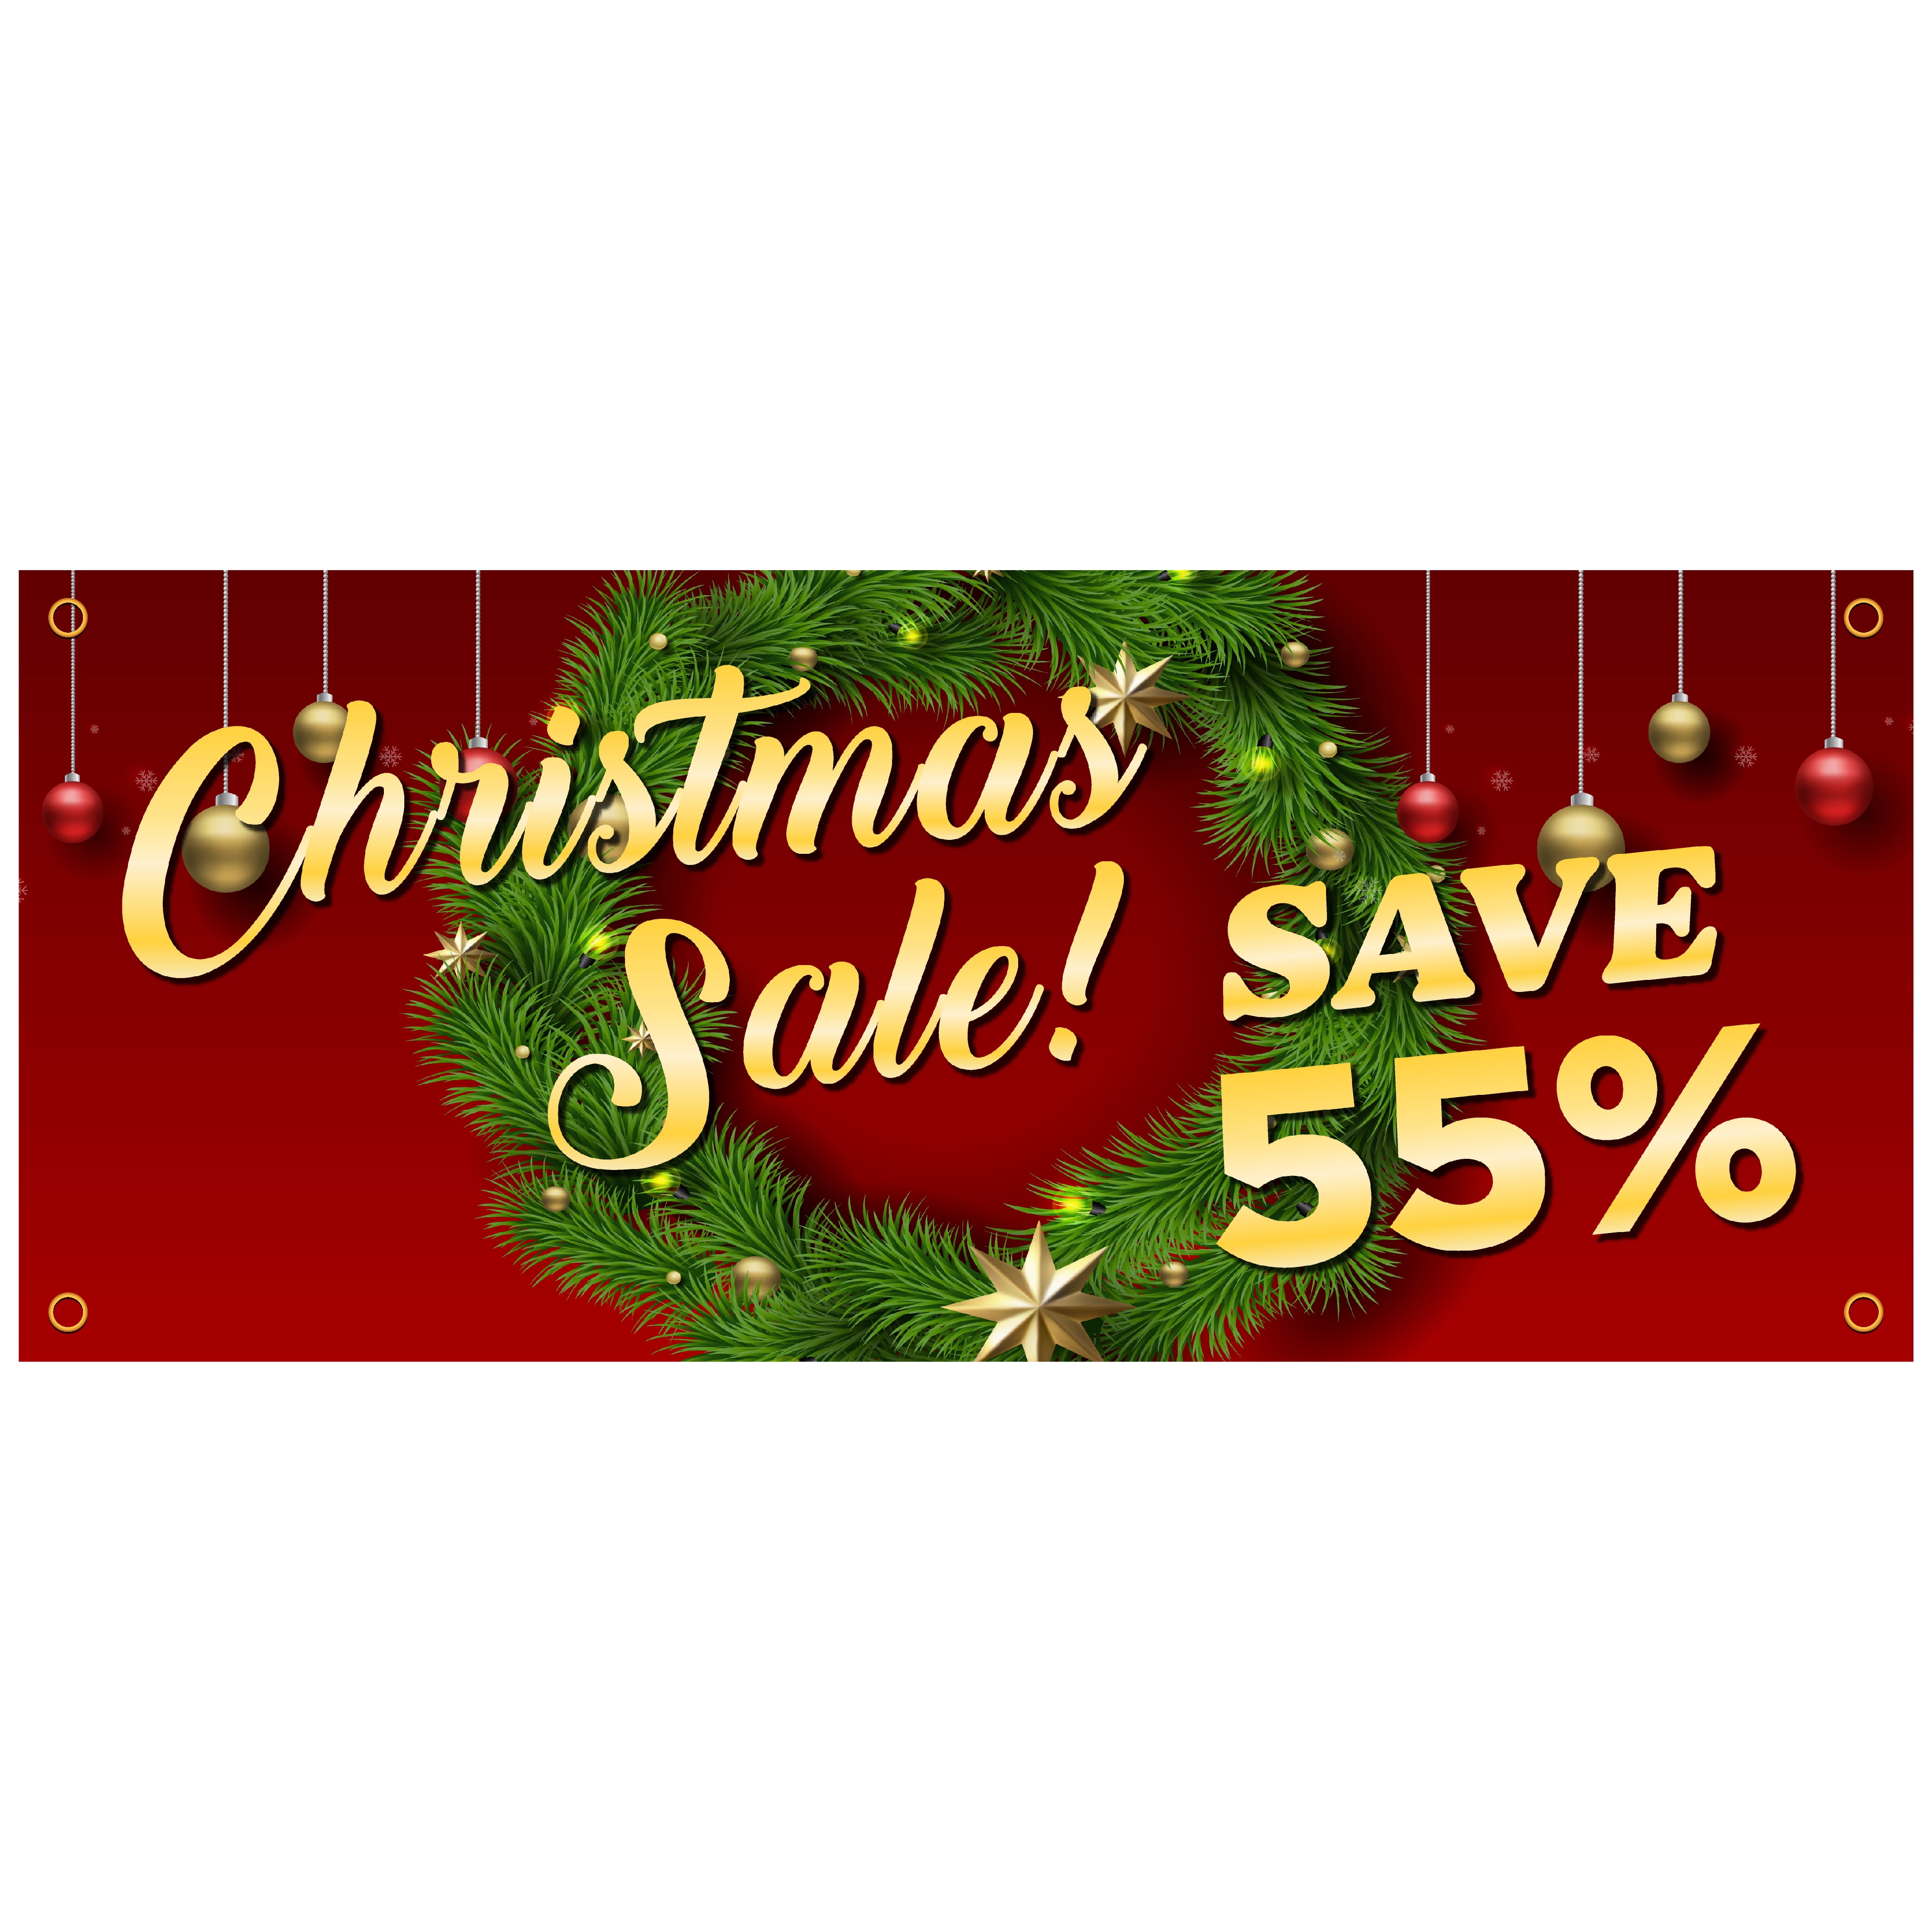 Non-Fabric Christmas Offer 13 oz Banner Heavy-Duty Vinyl Single-Sided with Metal Grommets